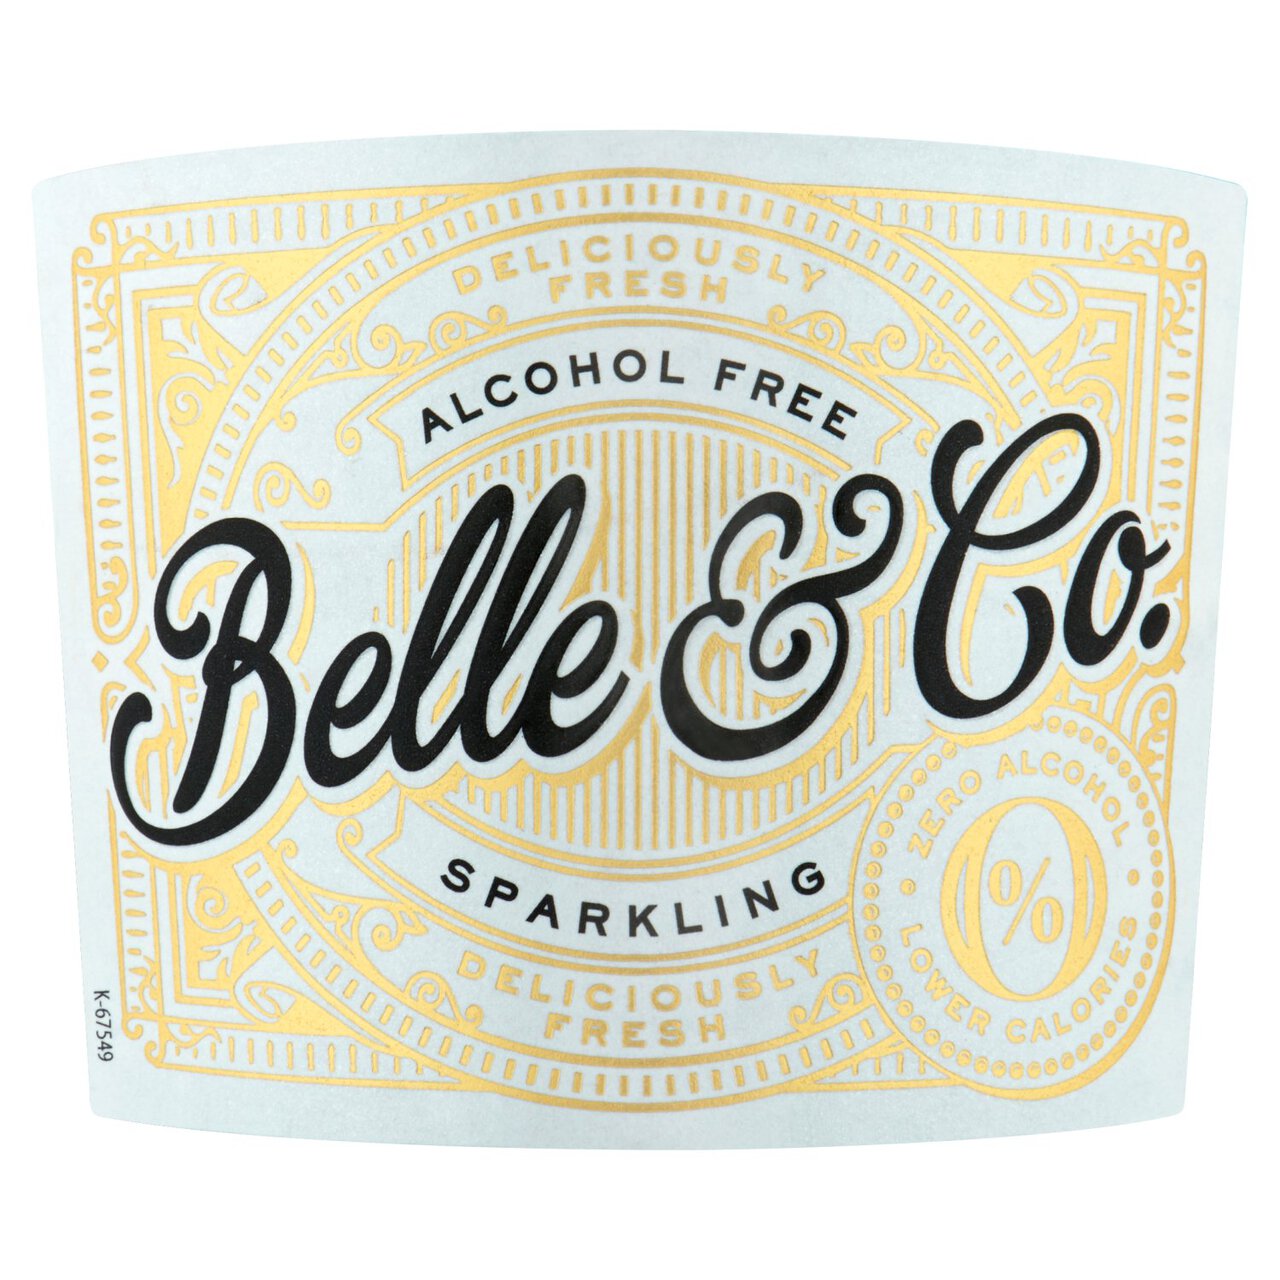 Belle & Co Alcohol Free Sparkling Wine 75cl